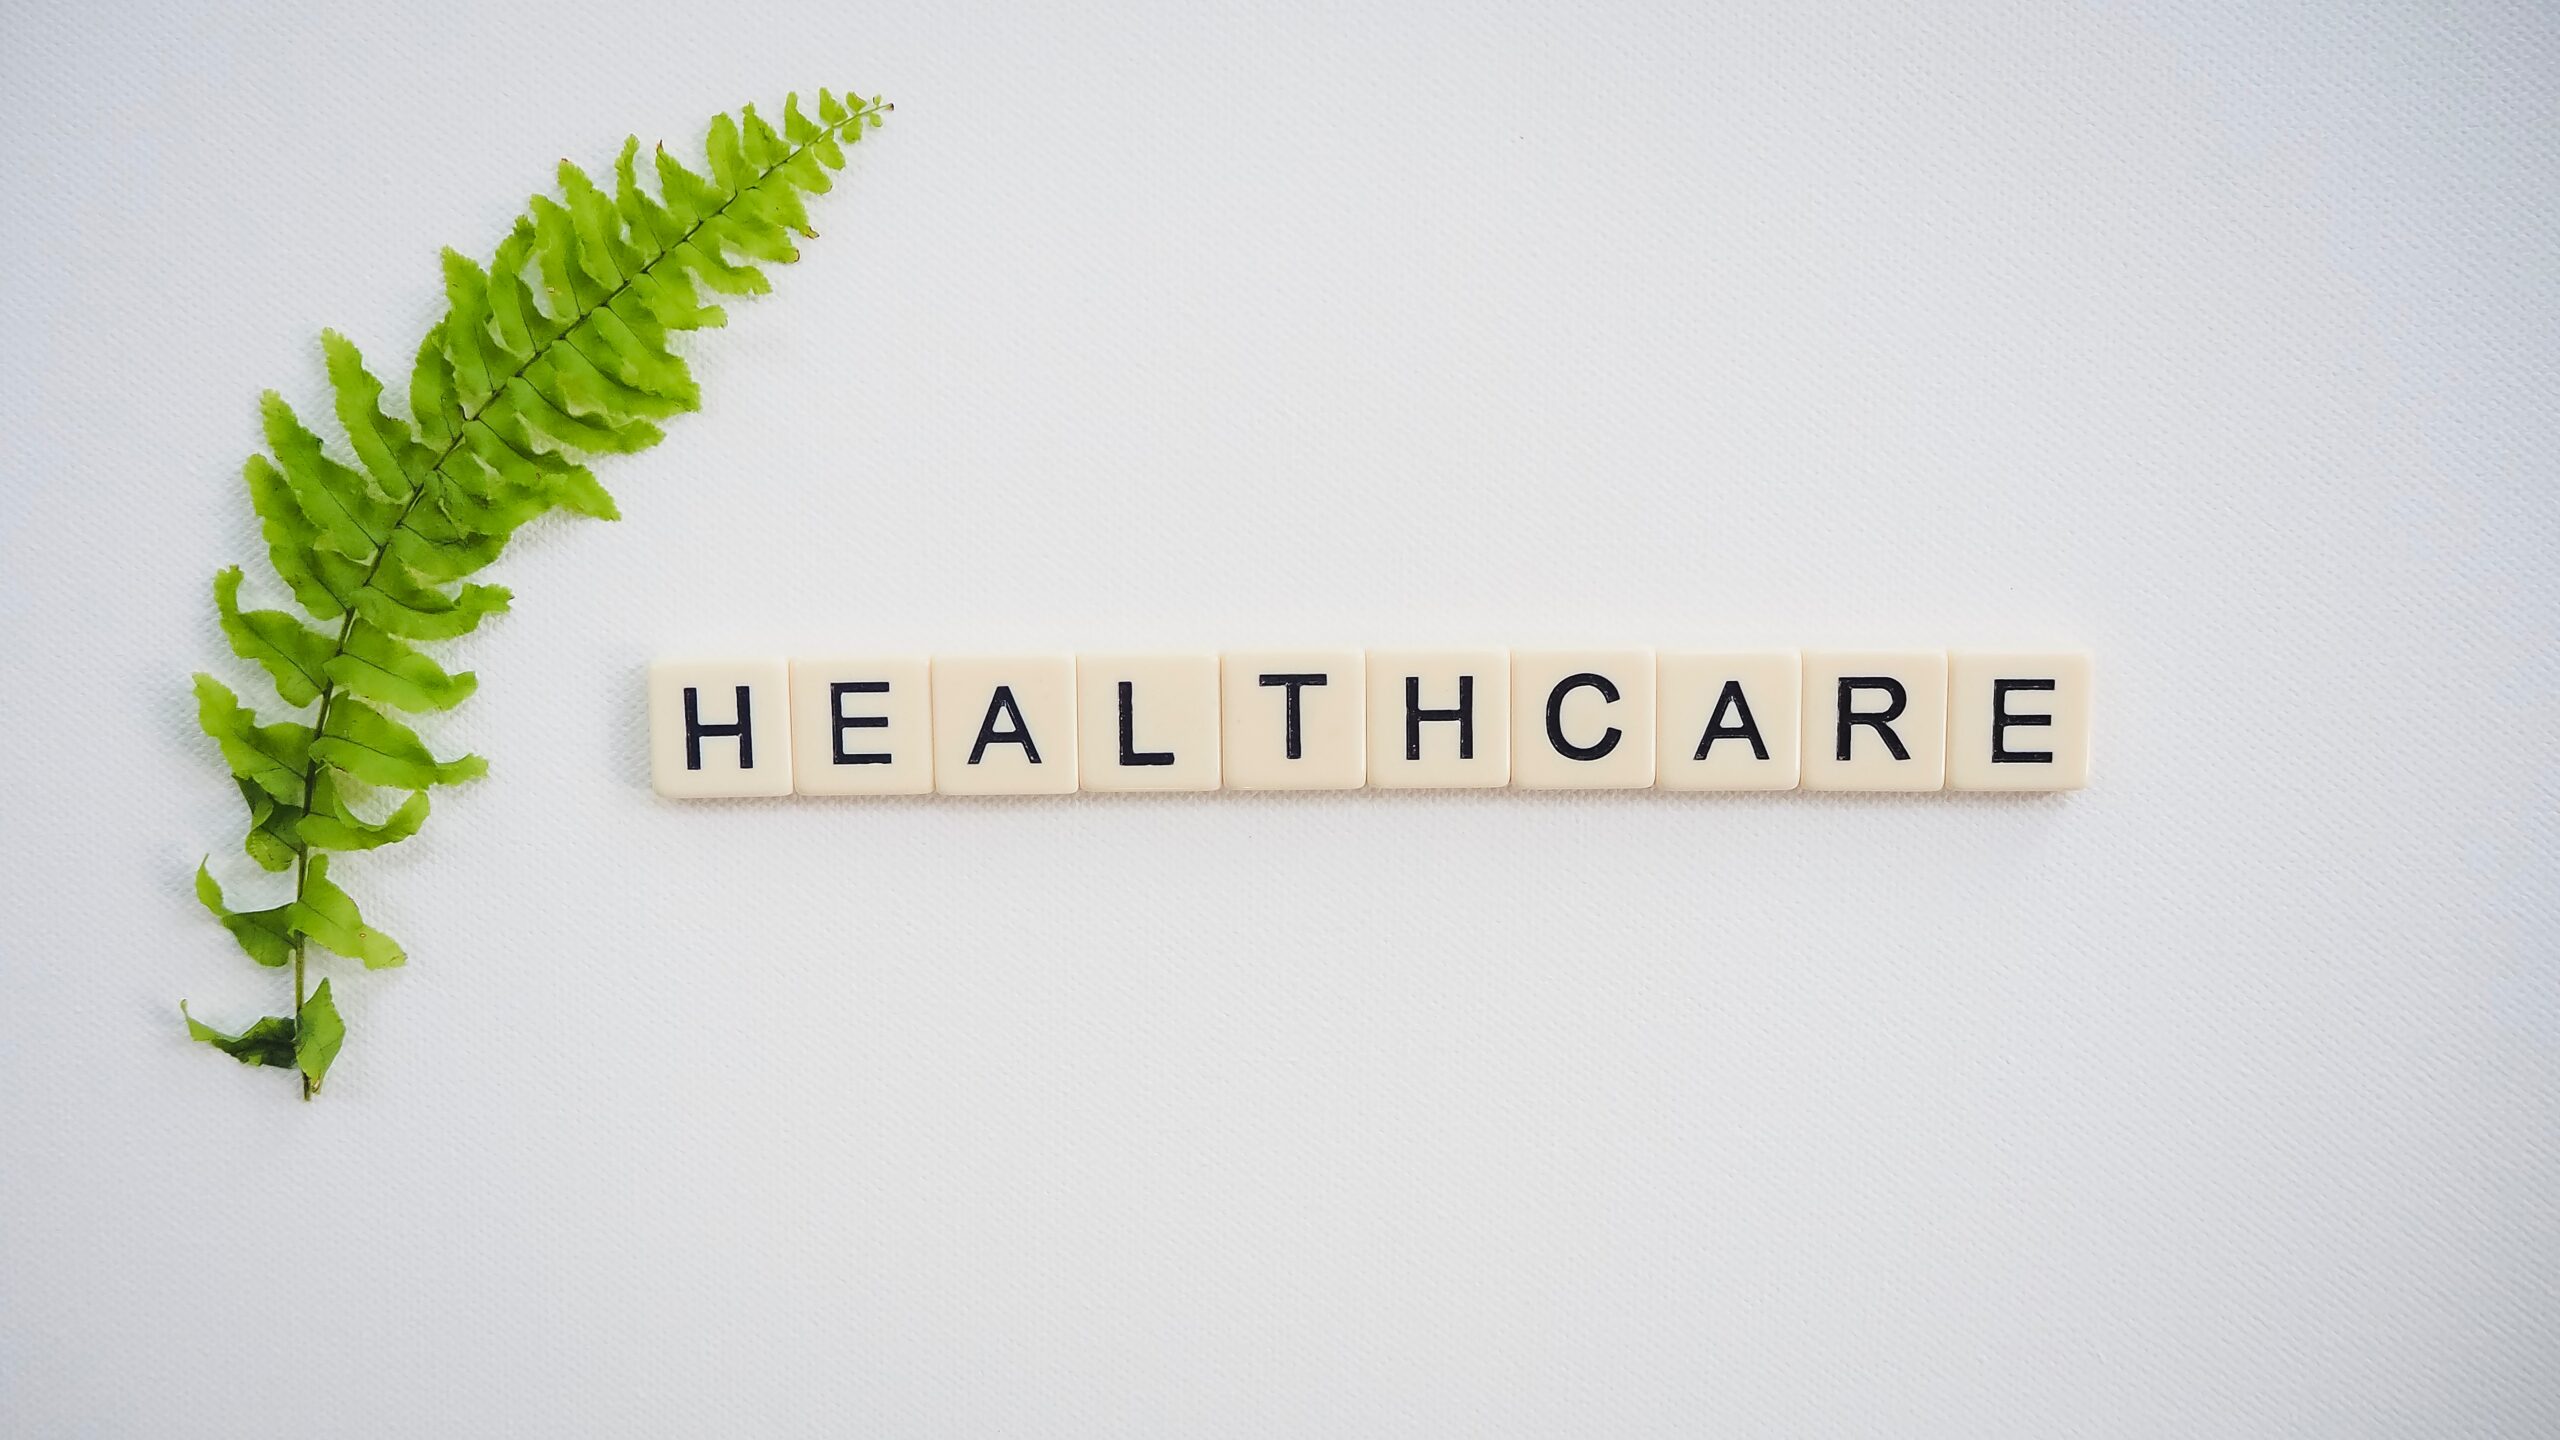 Scrabble pieces spelling out 'healthcare' next to a leaf